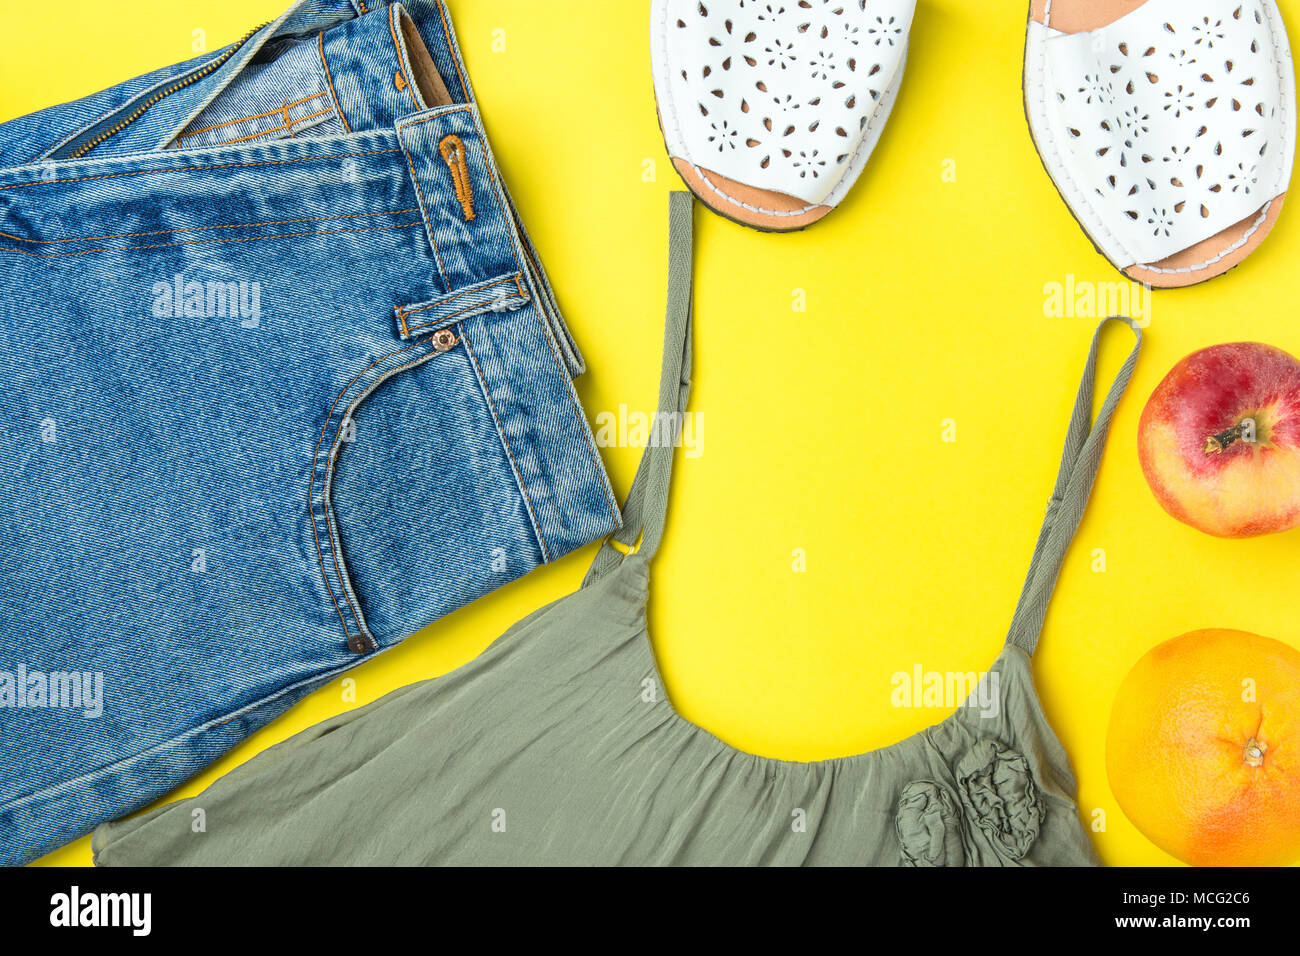 Classic Women Jeans Denim Shorts with Fringes Olive Color Tank Top Espandrille Sandals Apple Grapefruit on Yellow Background. Flat Lay. Street Summer  Stock Photo